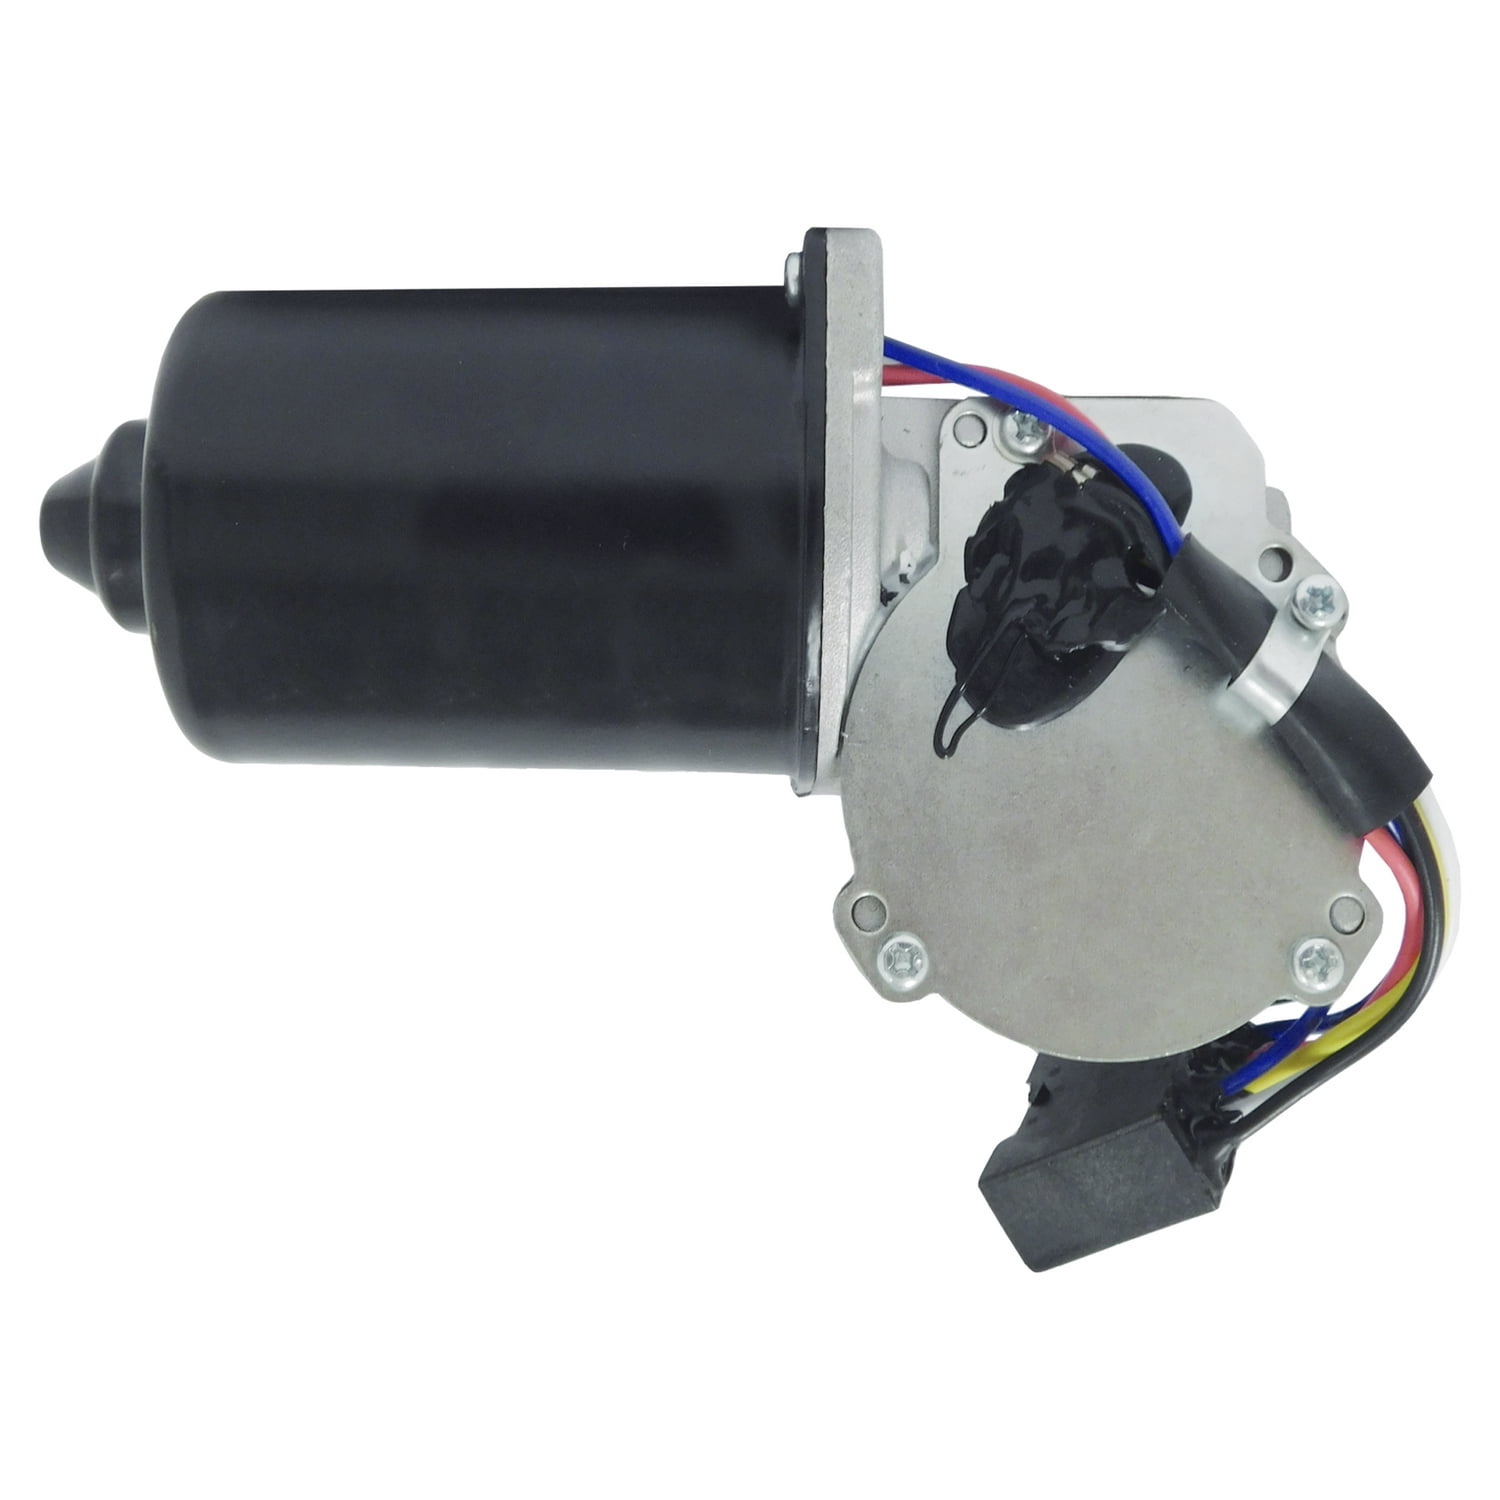 NEW 12V Front Right Wiper Motor Fits Fedex and Industrial Trucks 3Q3631 47004127 2-YEAR WARRANTY 